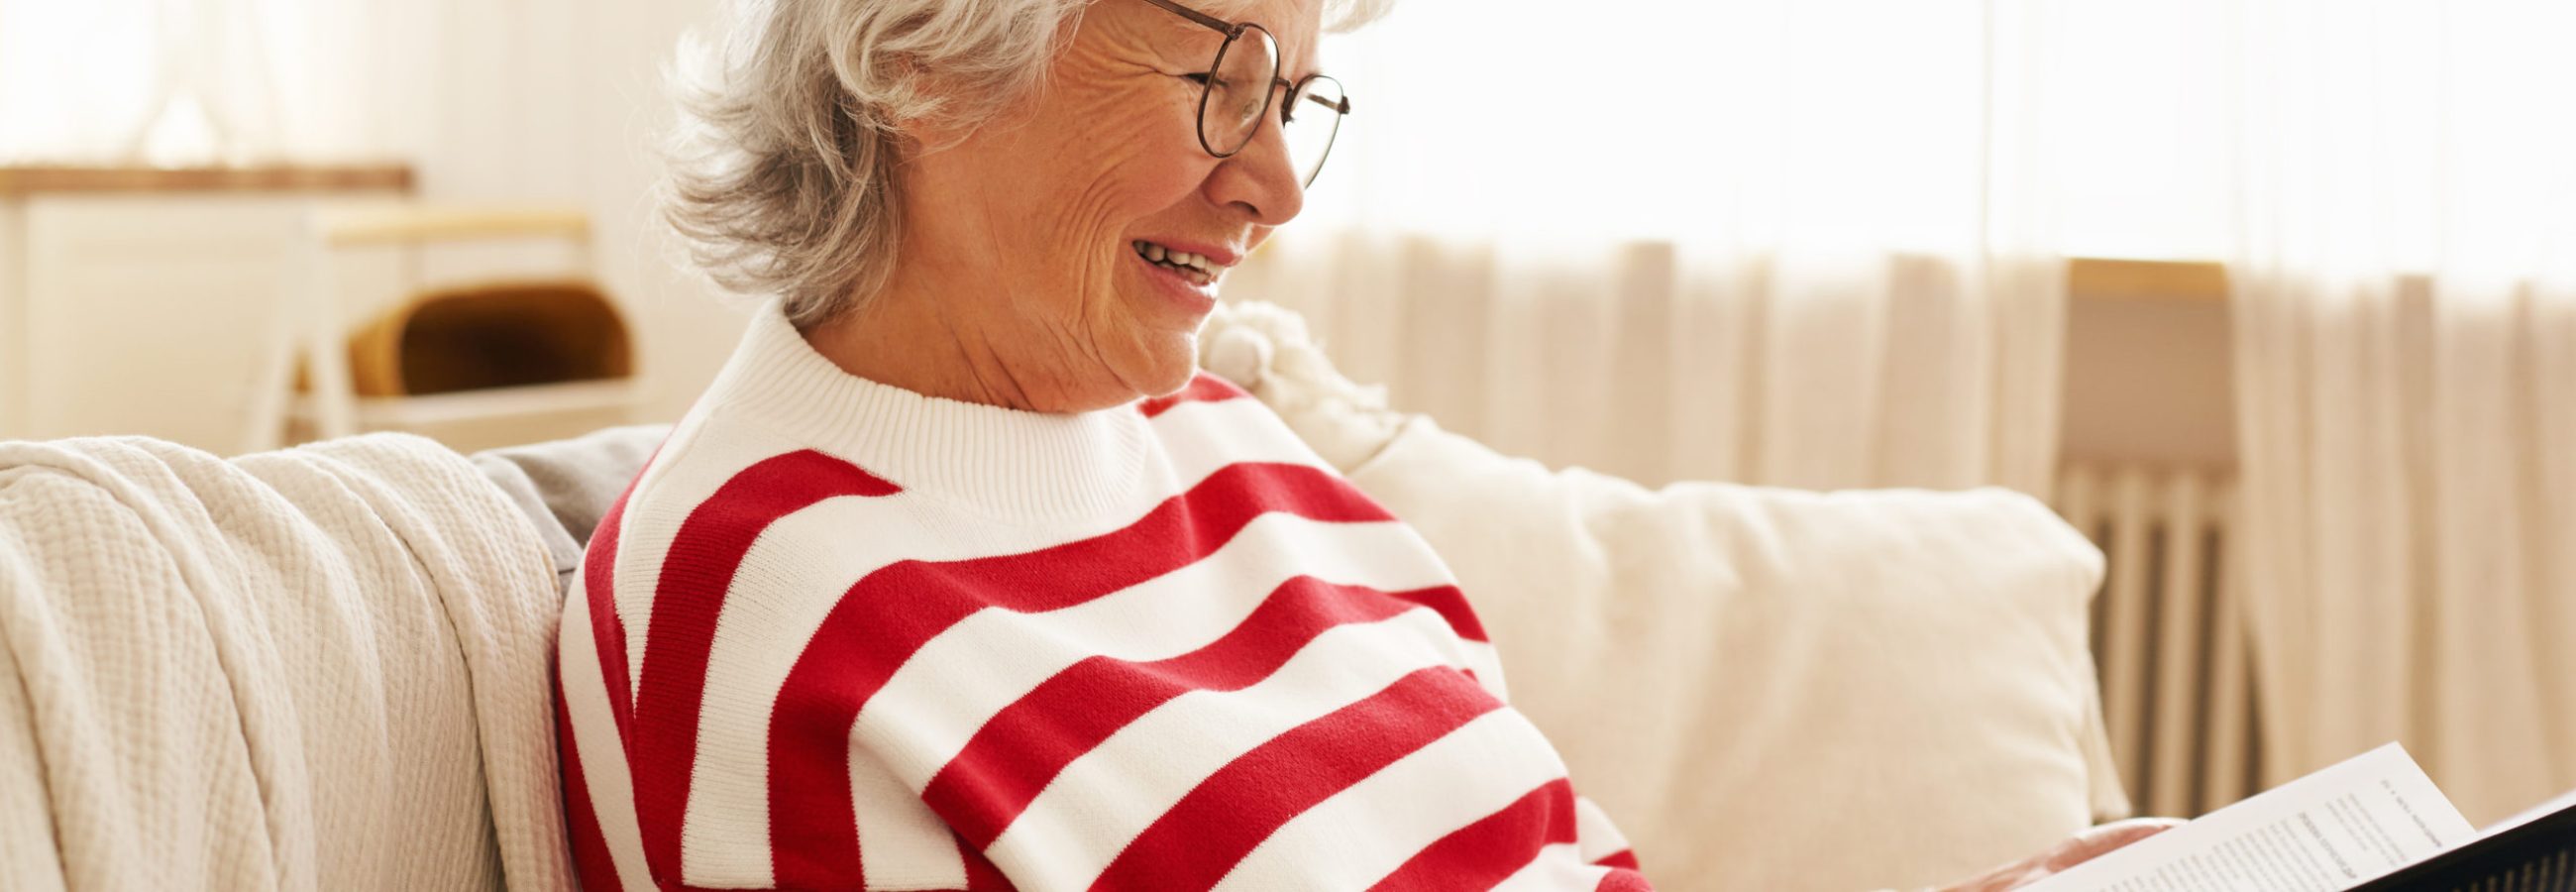 Side view of cute happy grandmother in glasses enjoying reading indoors, sitting on sofa with interesting detective story, smiling joyfully. Stylish elderly woman relaxing on couch holding book